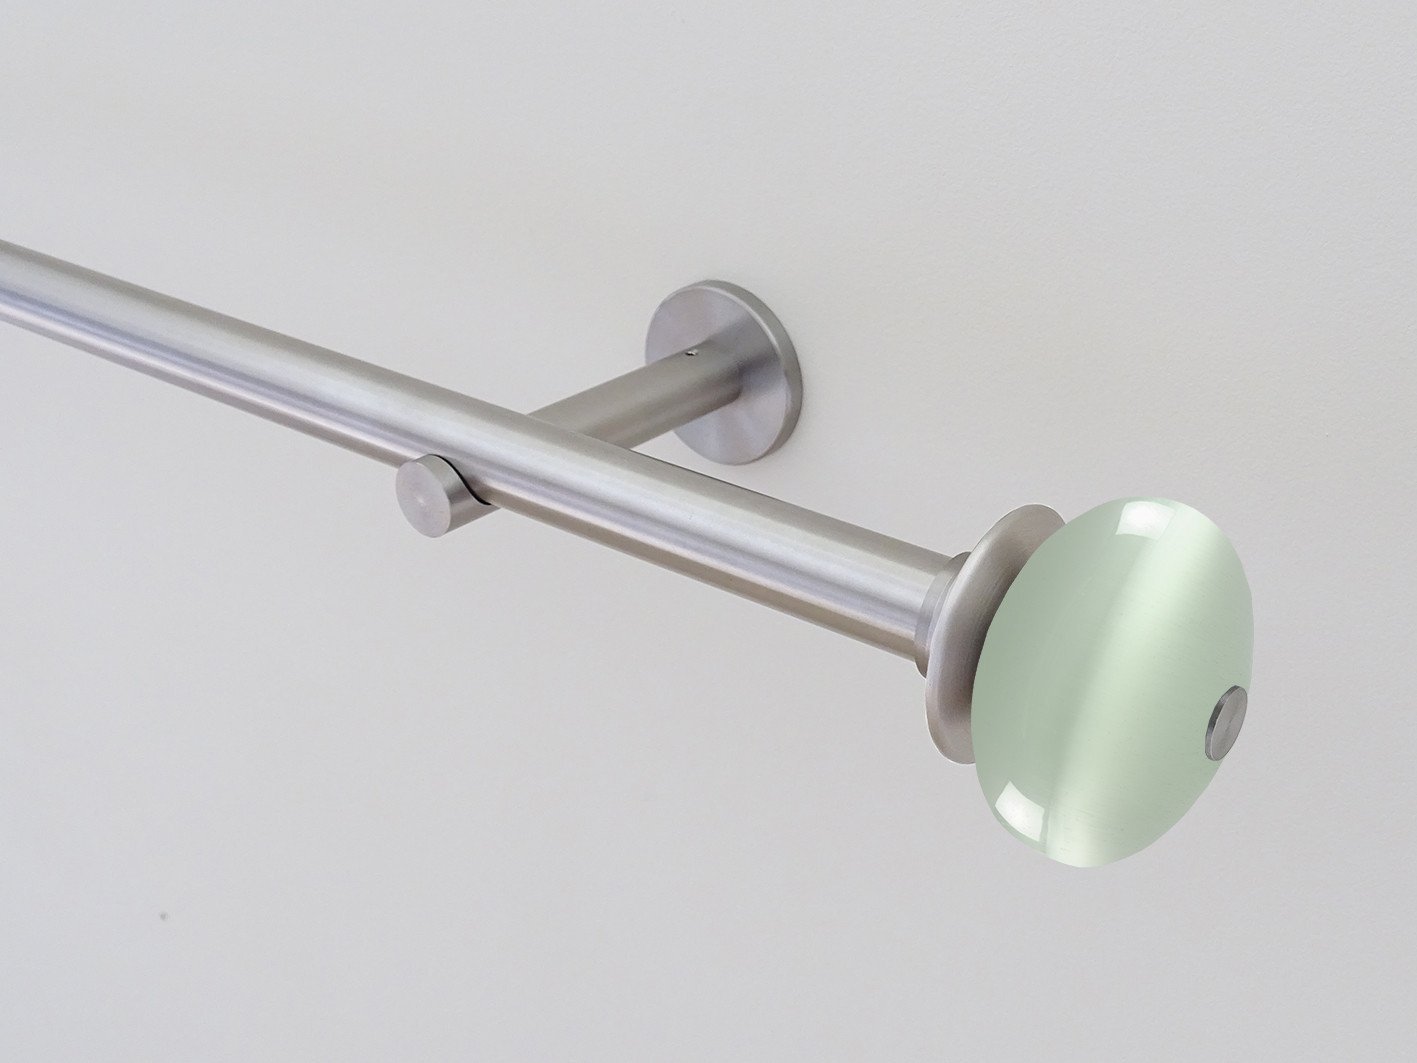 19mm stainless steel curtain pole set with glass moonstone finials in opal